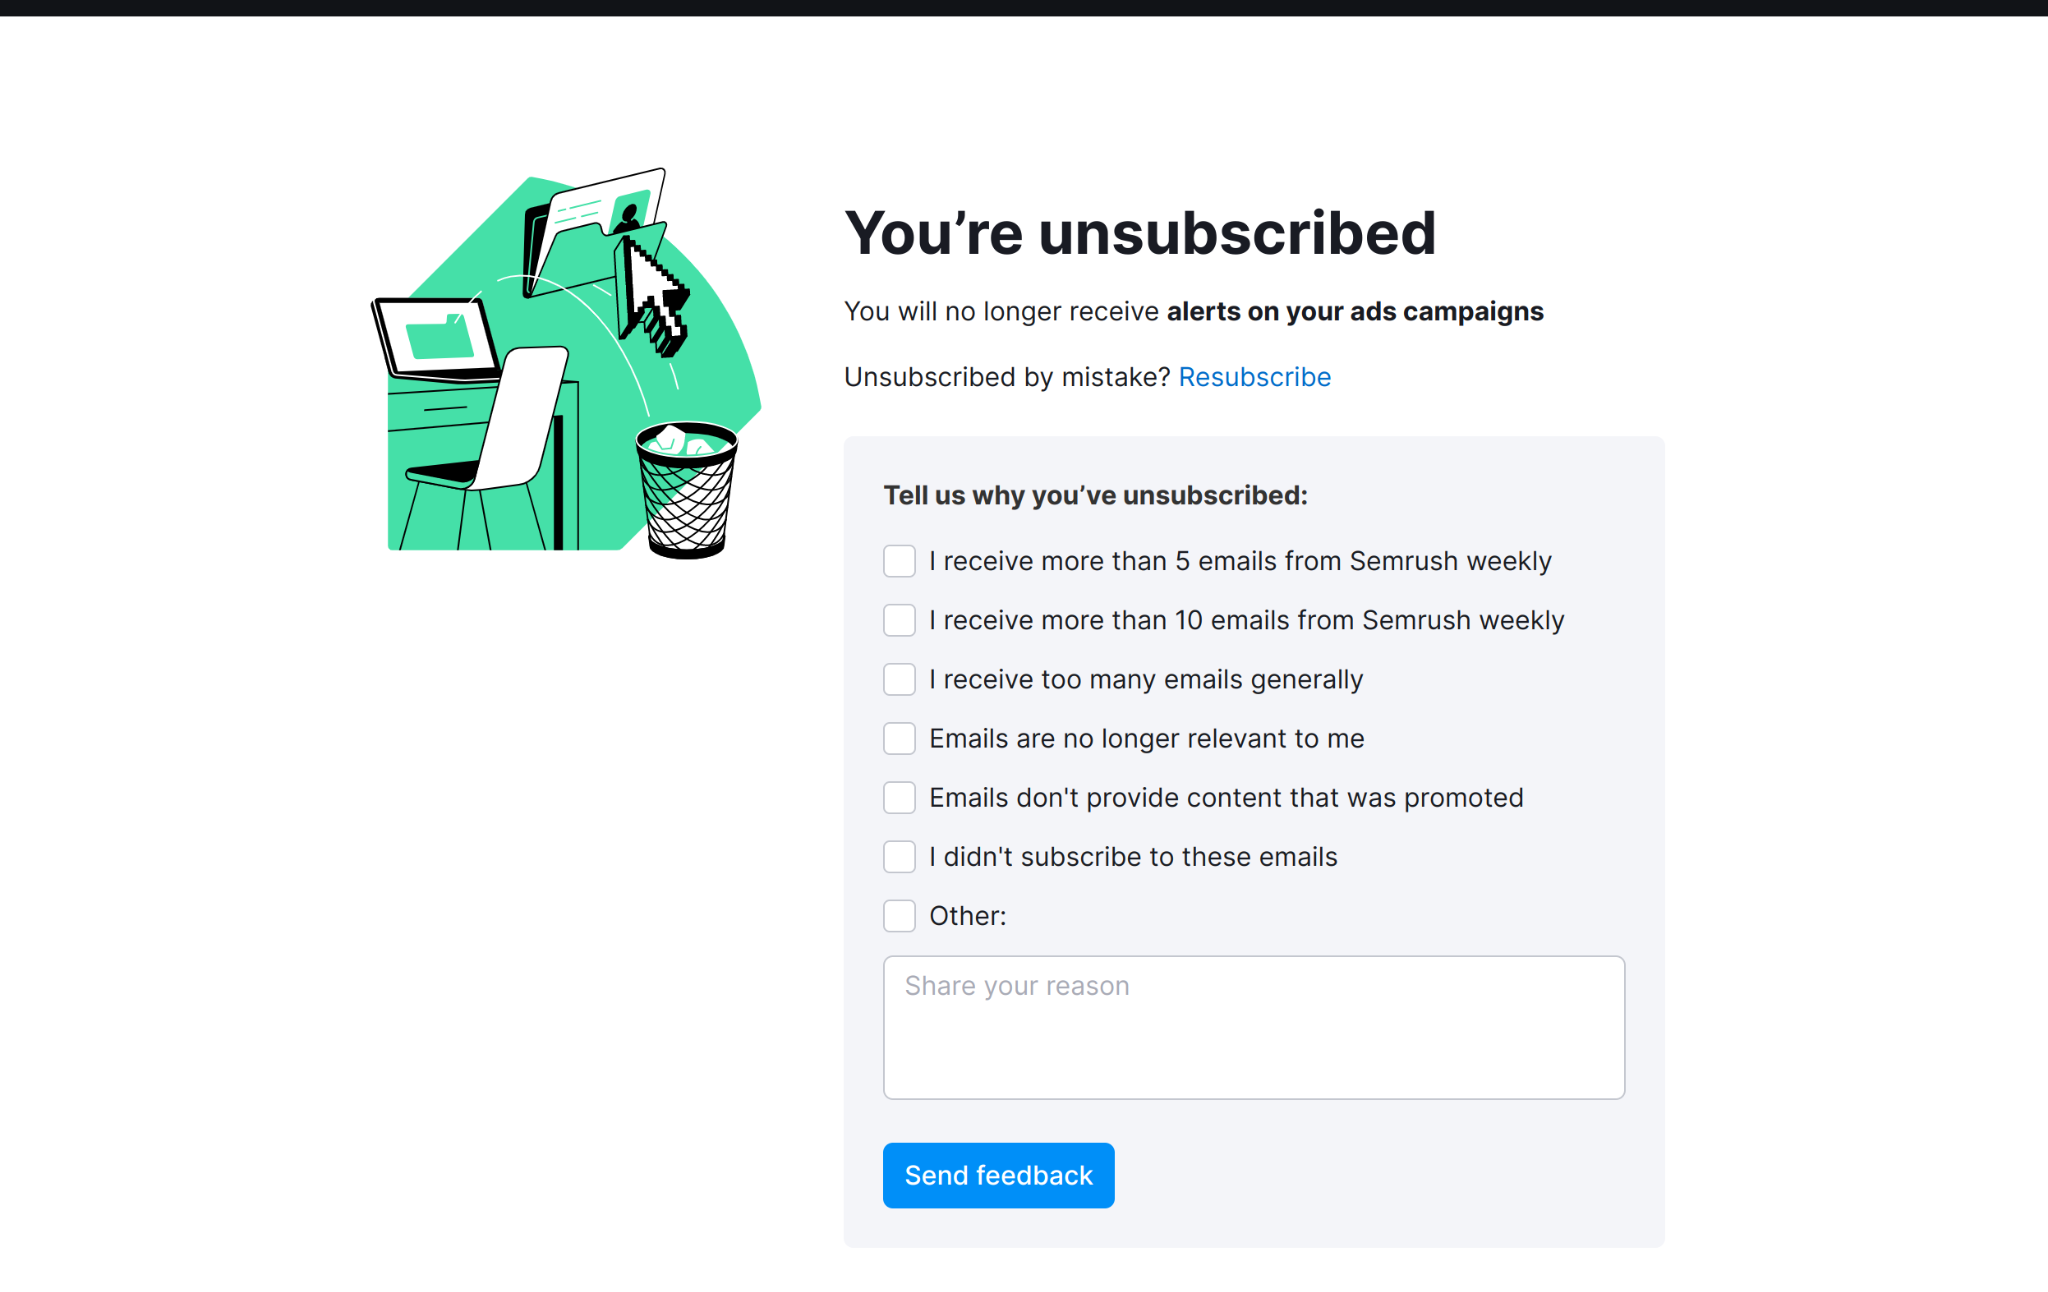 What the feedback form of newsletters looks like. There is a list of reasons to unsubscribe and an option to leave a comment. There is also an option to resubscribe.